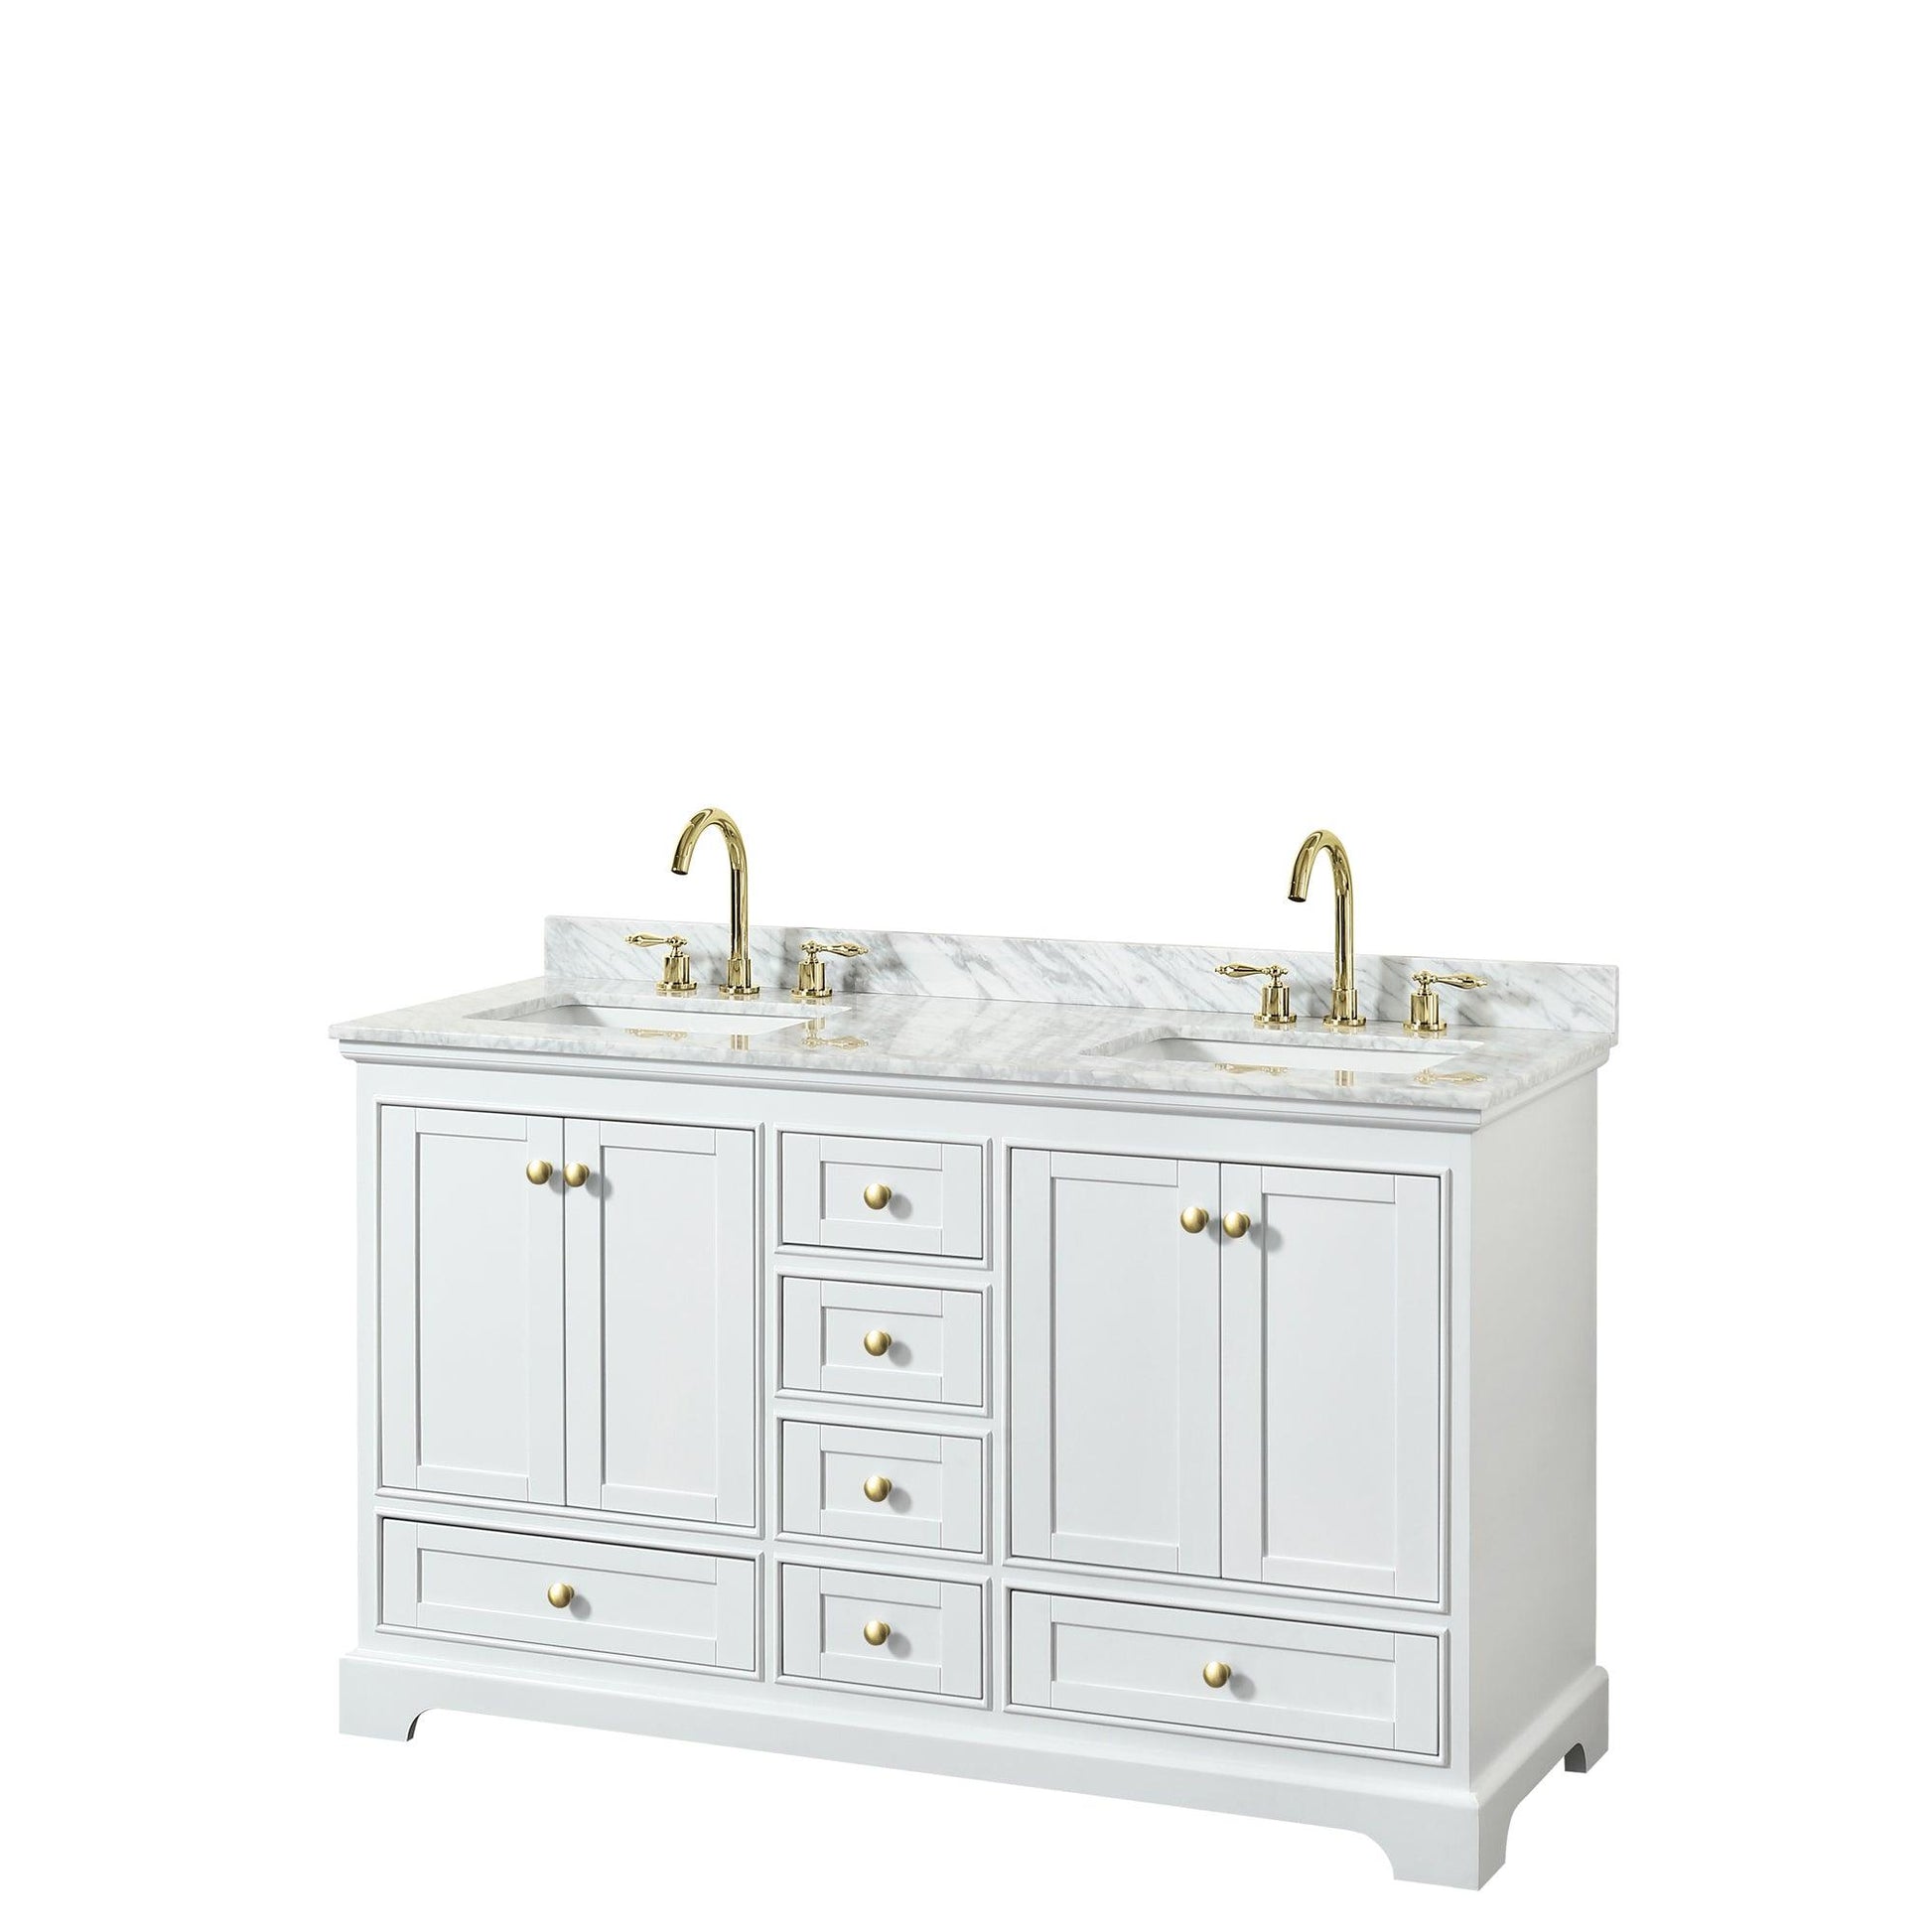 Wyndham Collection Deborah Double Bathroom Vanity in White, White Carrara Marble Countertop, Undermount Square Sinks, Brushed Gold Trim, Optional 24 Inch Mirrors/Medicine Cabinets - Sea & Stone Bath